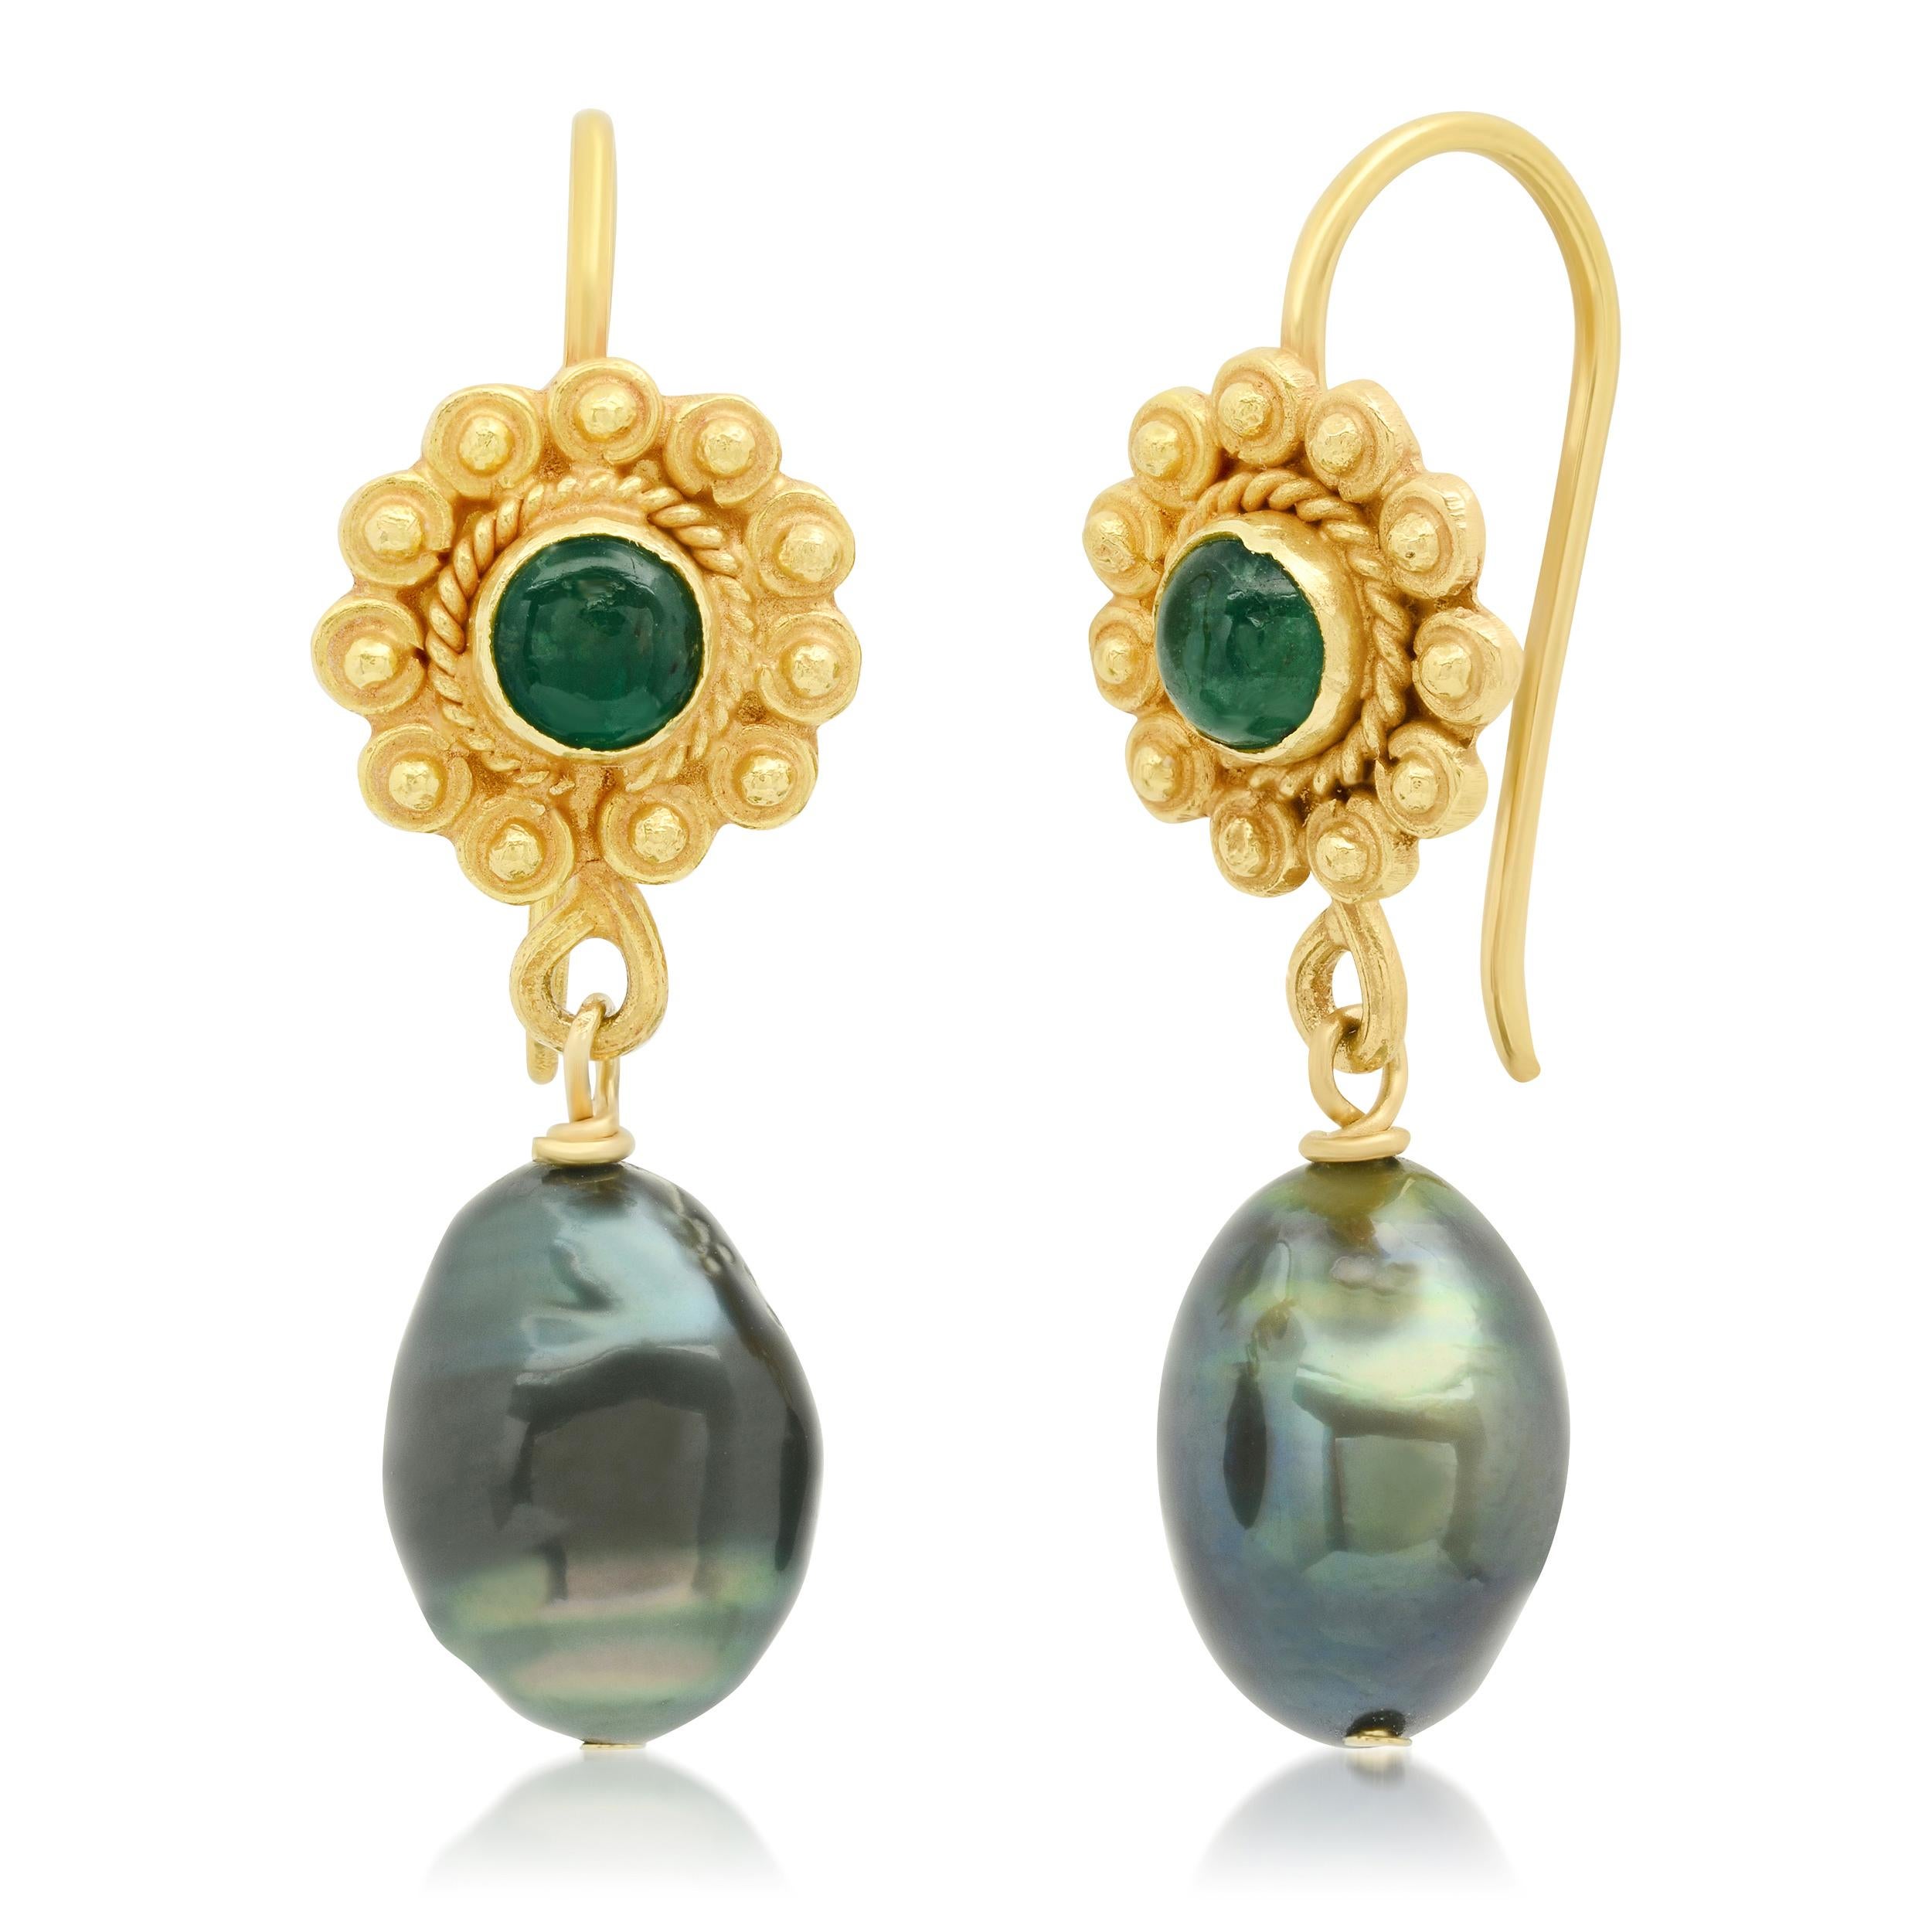 Set in rich 18k yellow gold with elegantly designed posts framing two perfectly matched Emerald Cabochons.  Completing the design are 2 black Tahitian Keshi pearls with a hint of a green hue to compliment the emeralds and suspended to give just the